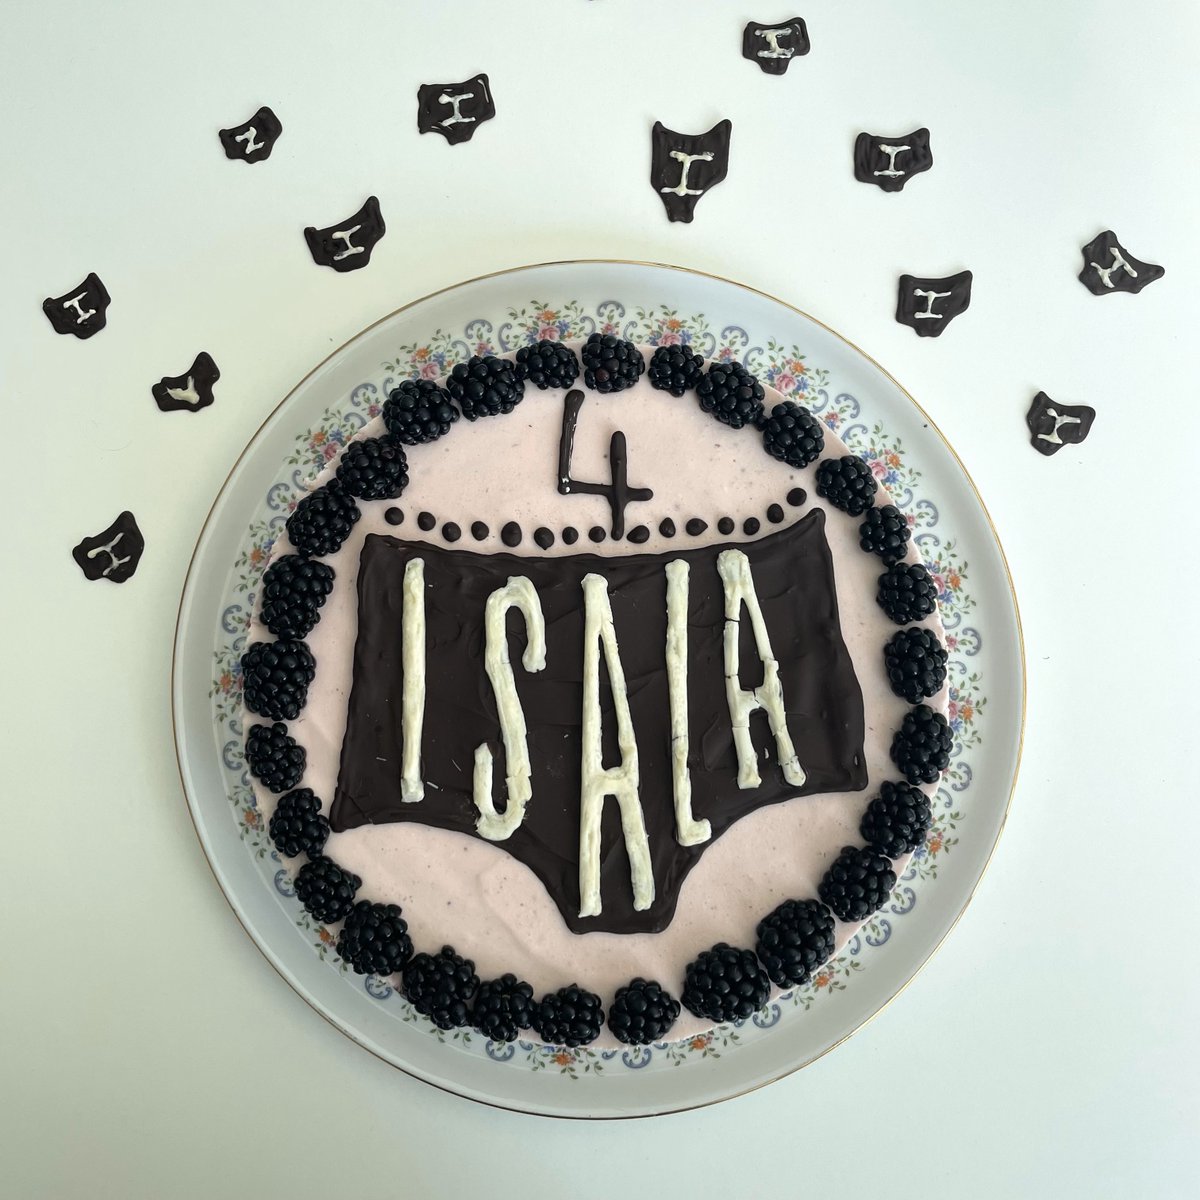 The Isala project turned four years old! 🎉And what better way to celebrate than with a beautiful cake? Stay tuned, more celebrations await today!